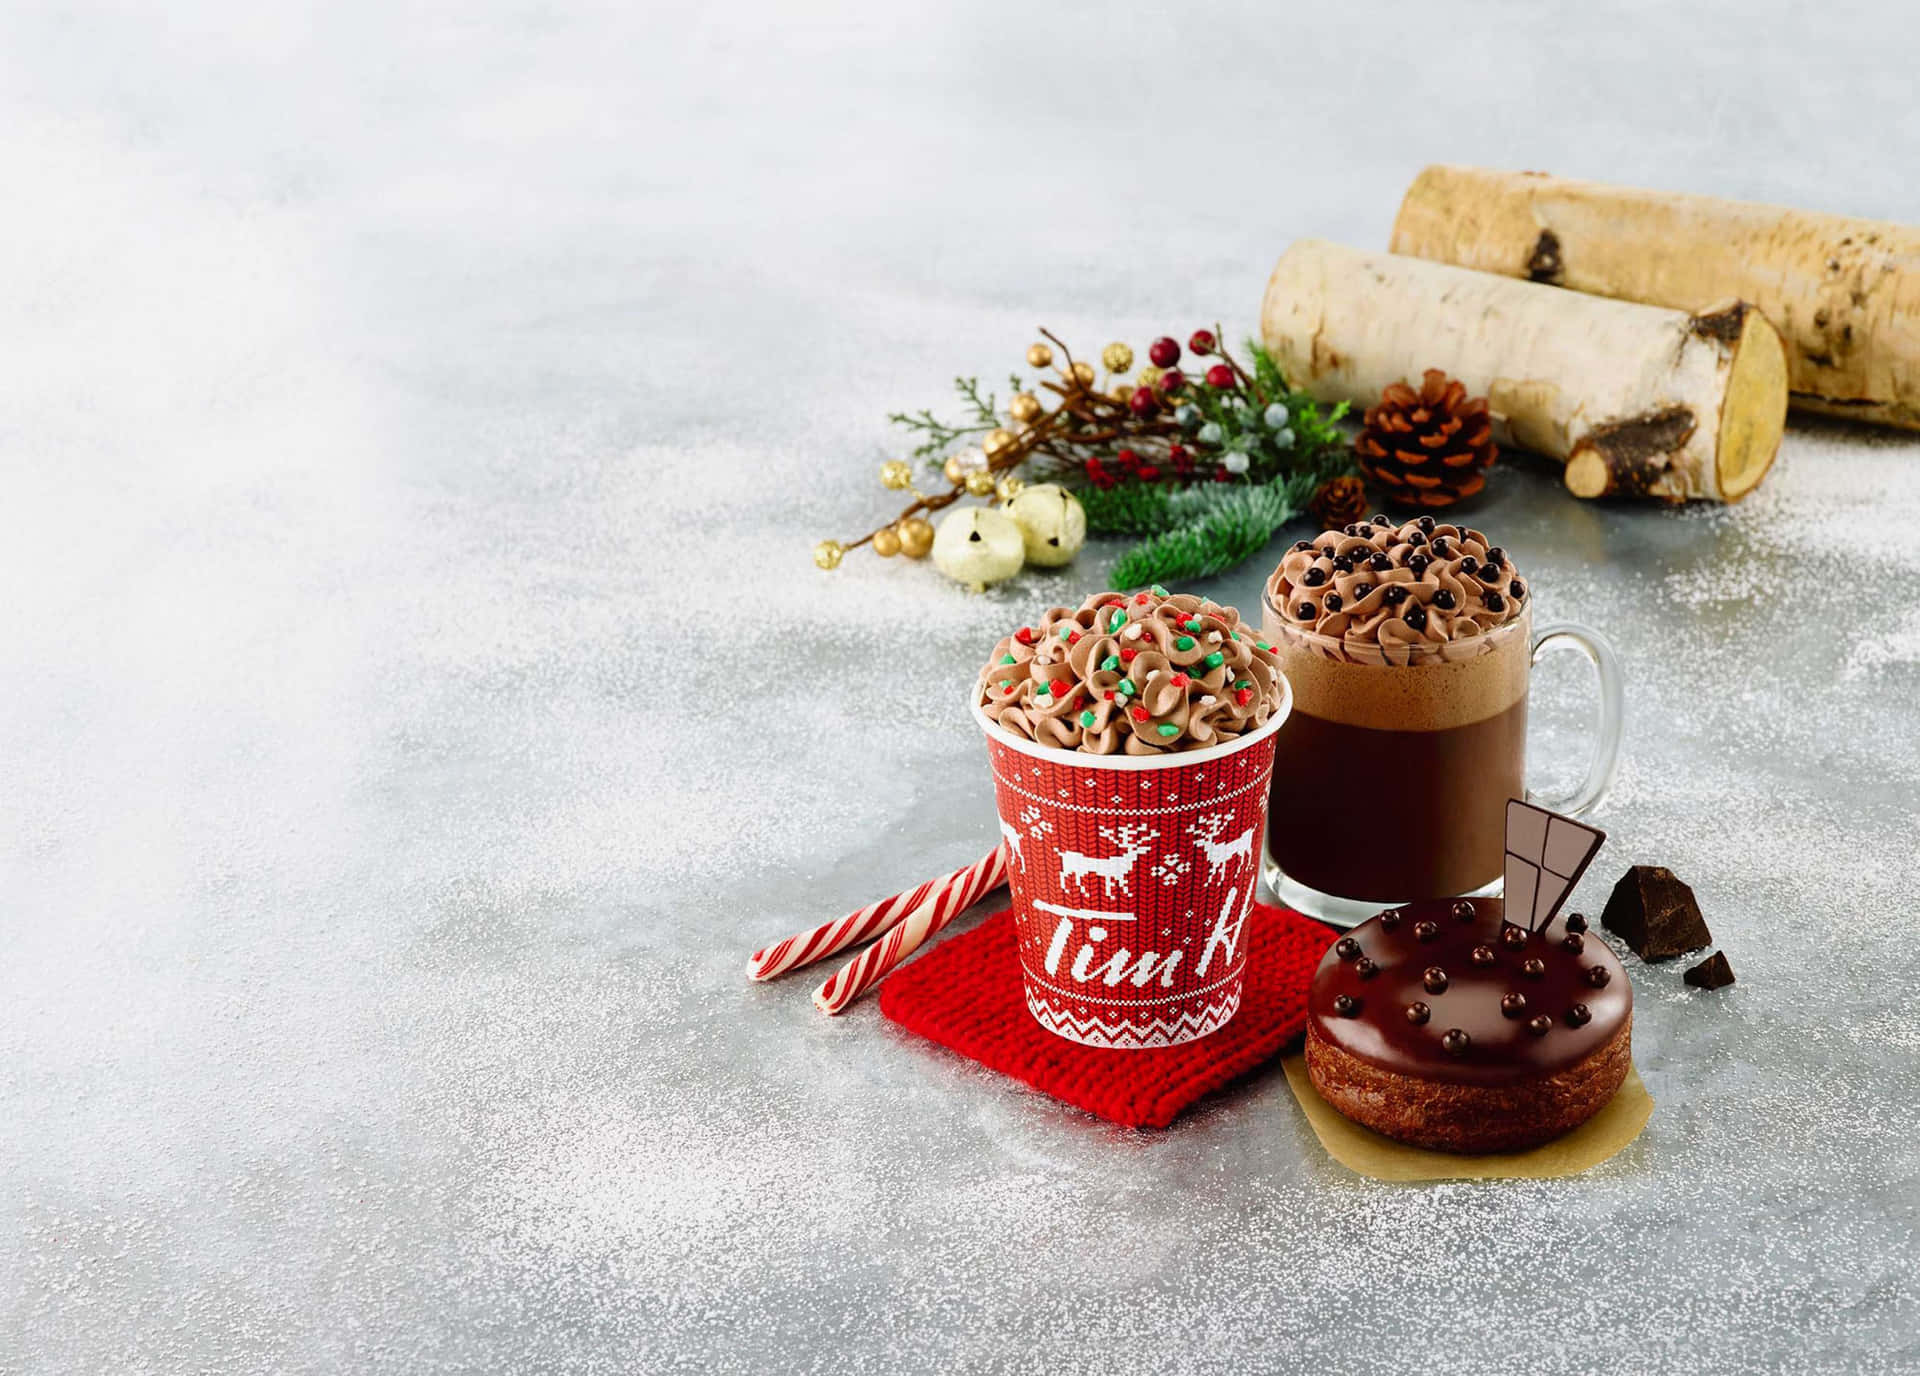 A mouthwatering assortment of winter desserts on a festive table Wallpaper